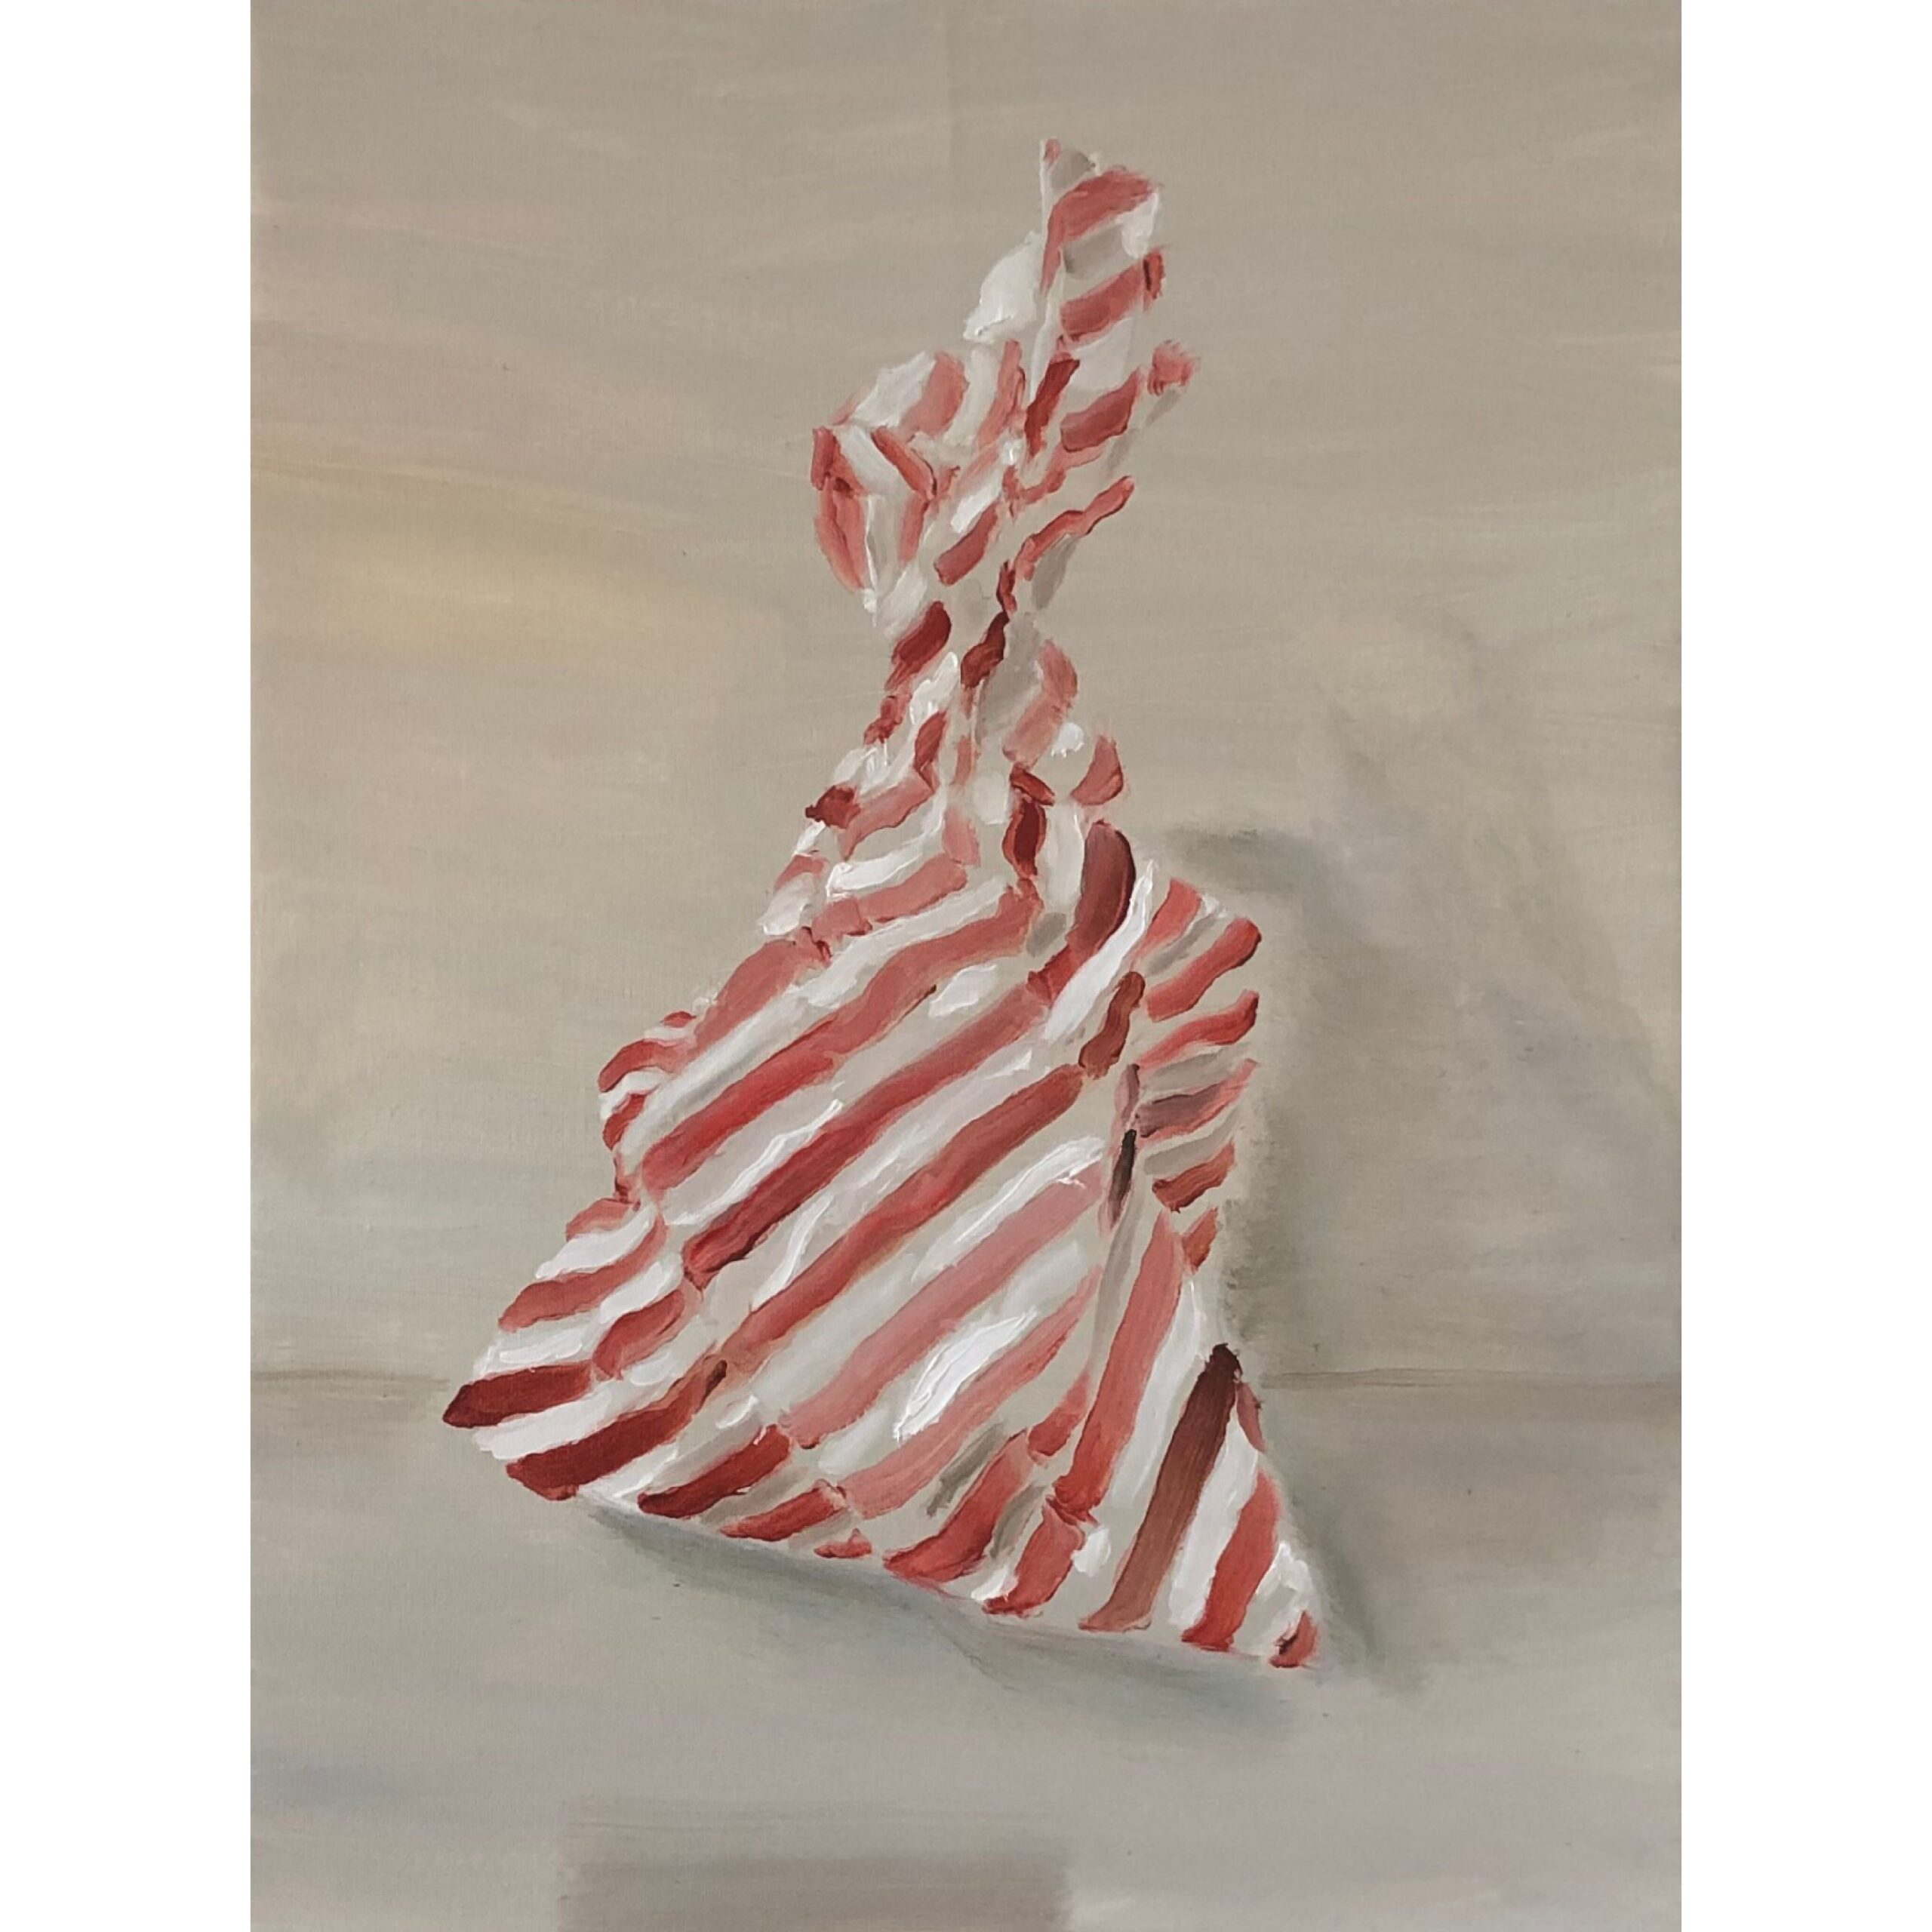 Candy Poetry V, 40x30, oil on canvas, Brit Windahl 2018